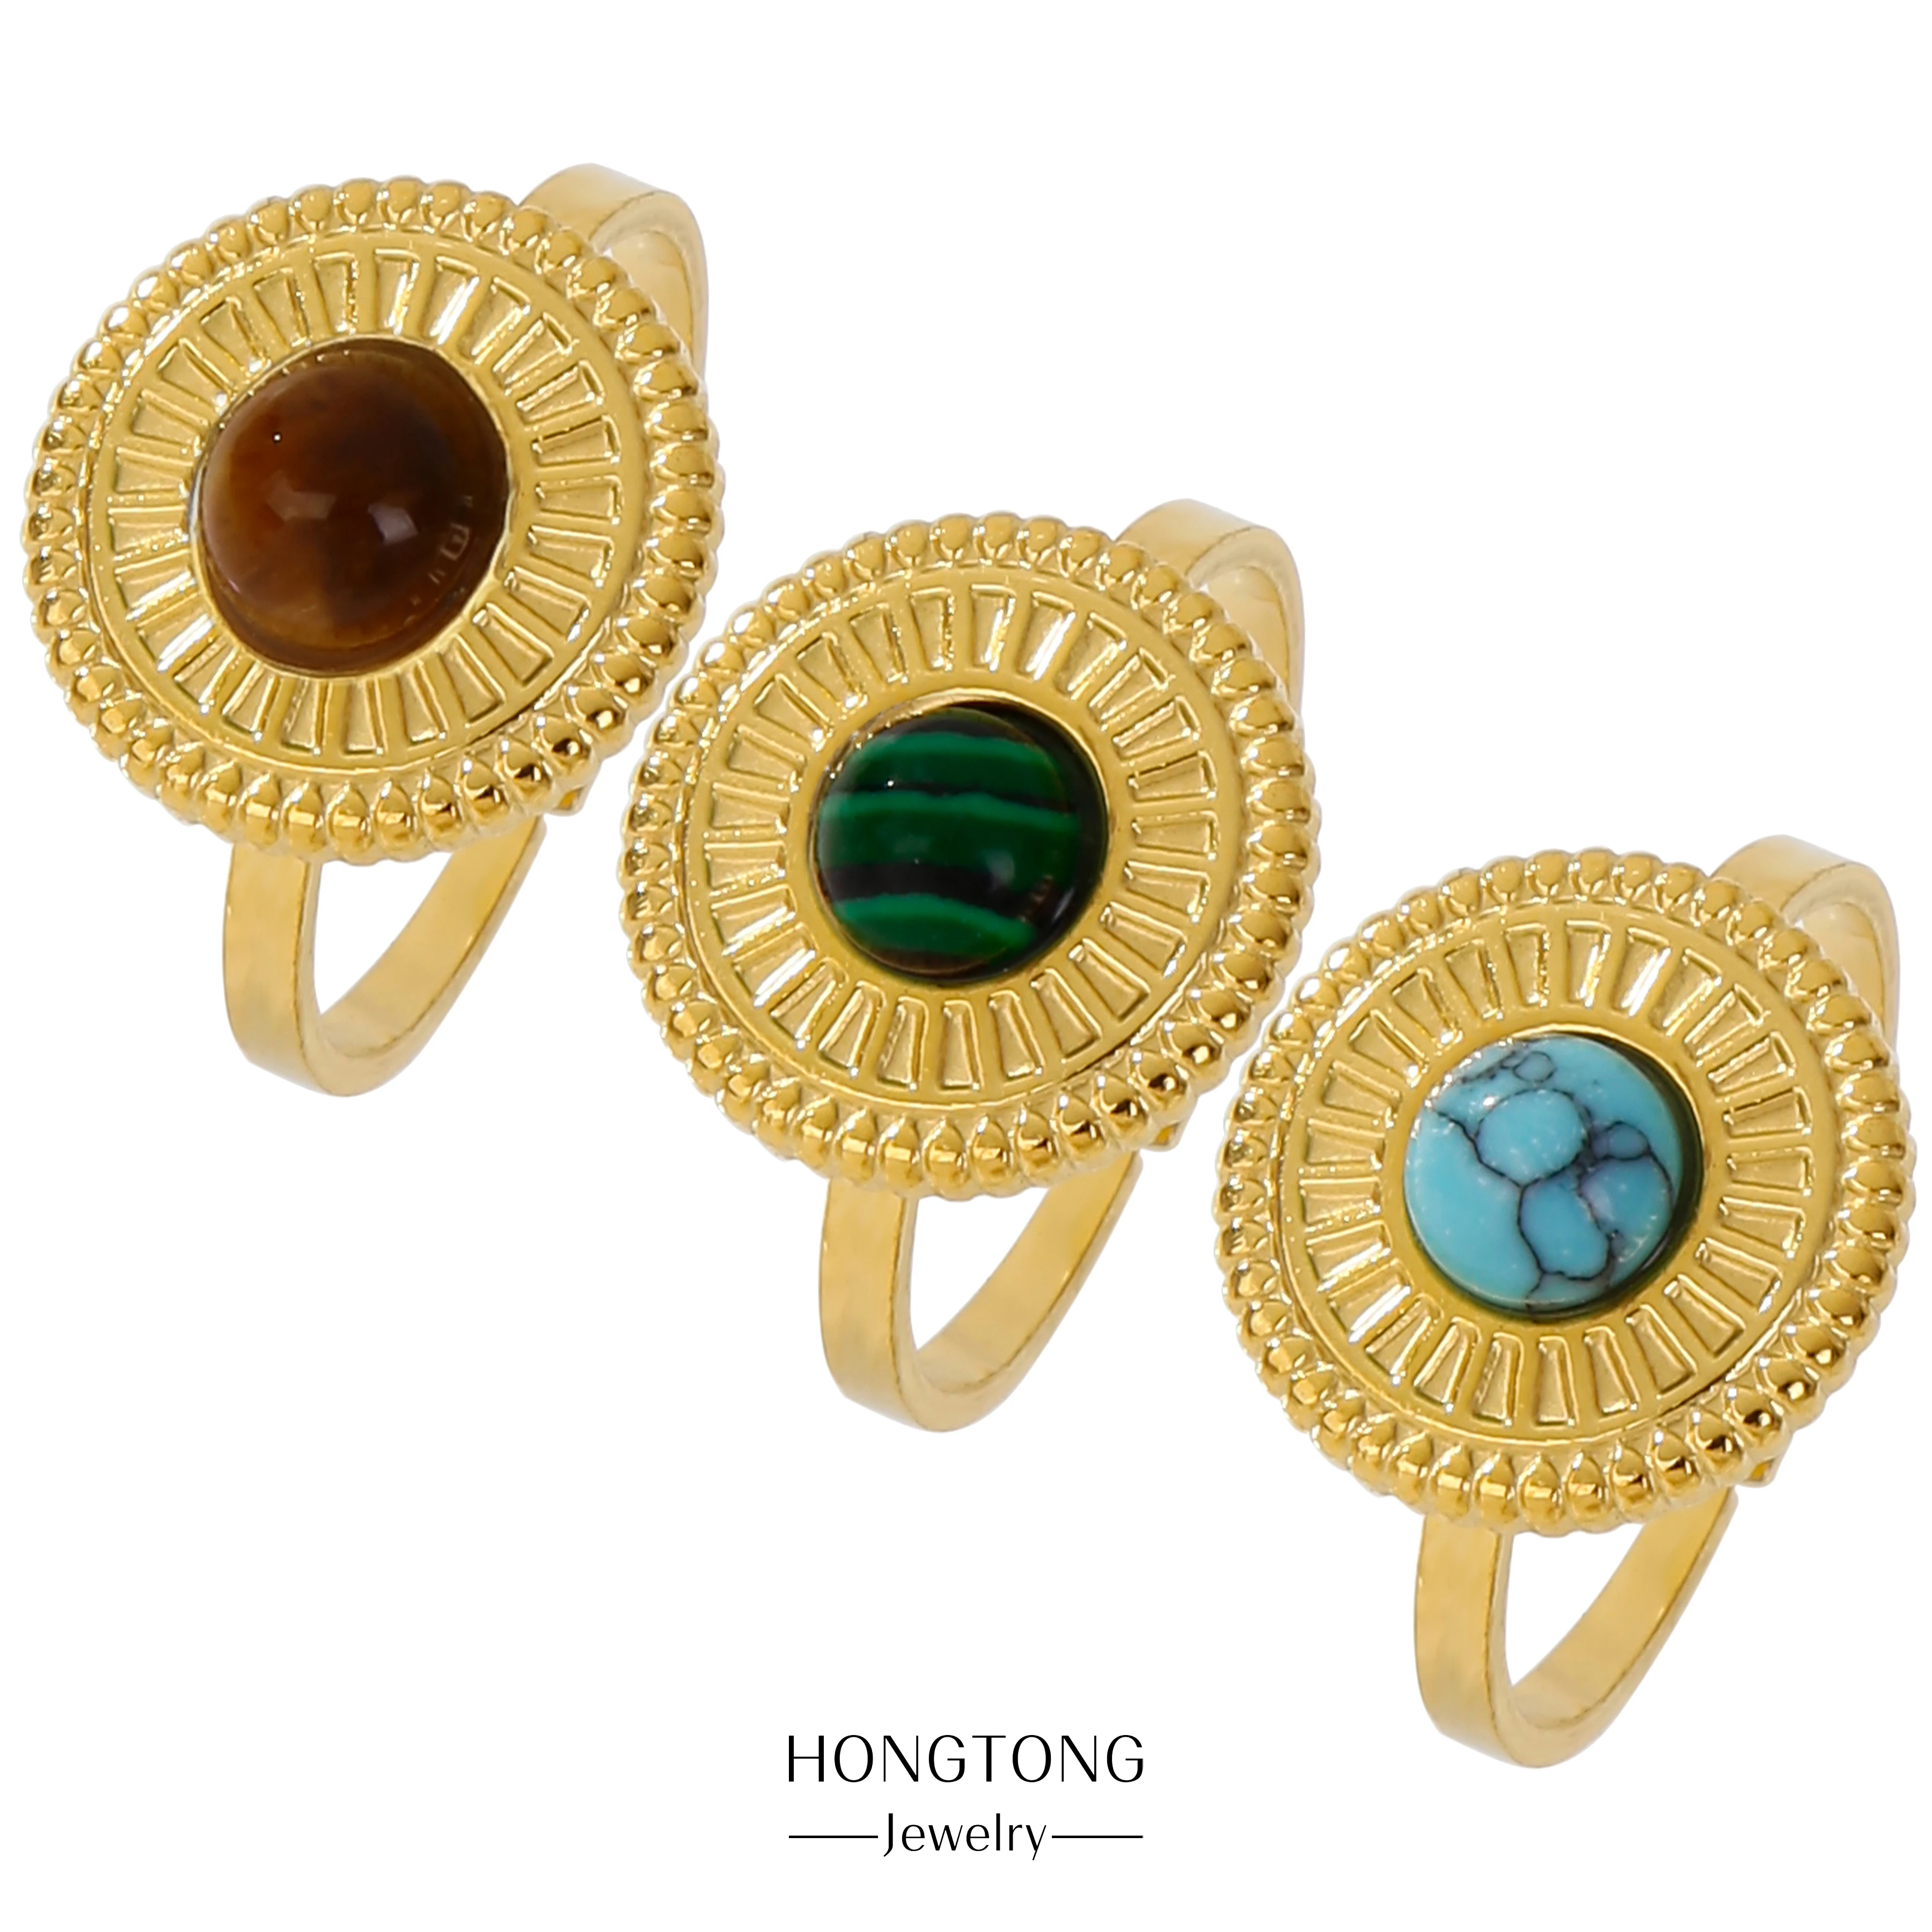 

HONGTONG Gold-Plated Irregular Pattern Oil Pressed Gemstone Hot Style Fashion Ring Stainless Steel Ring Jewelry Couple Gift